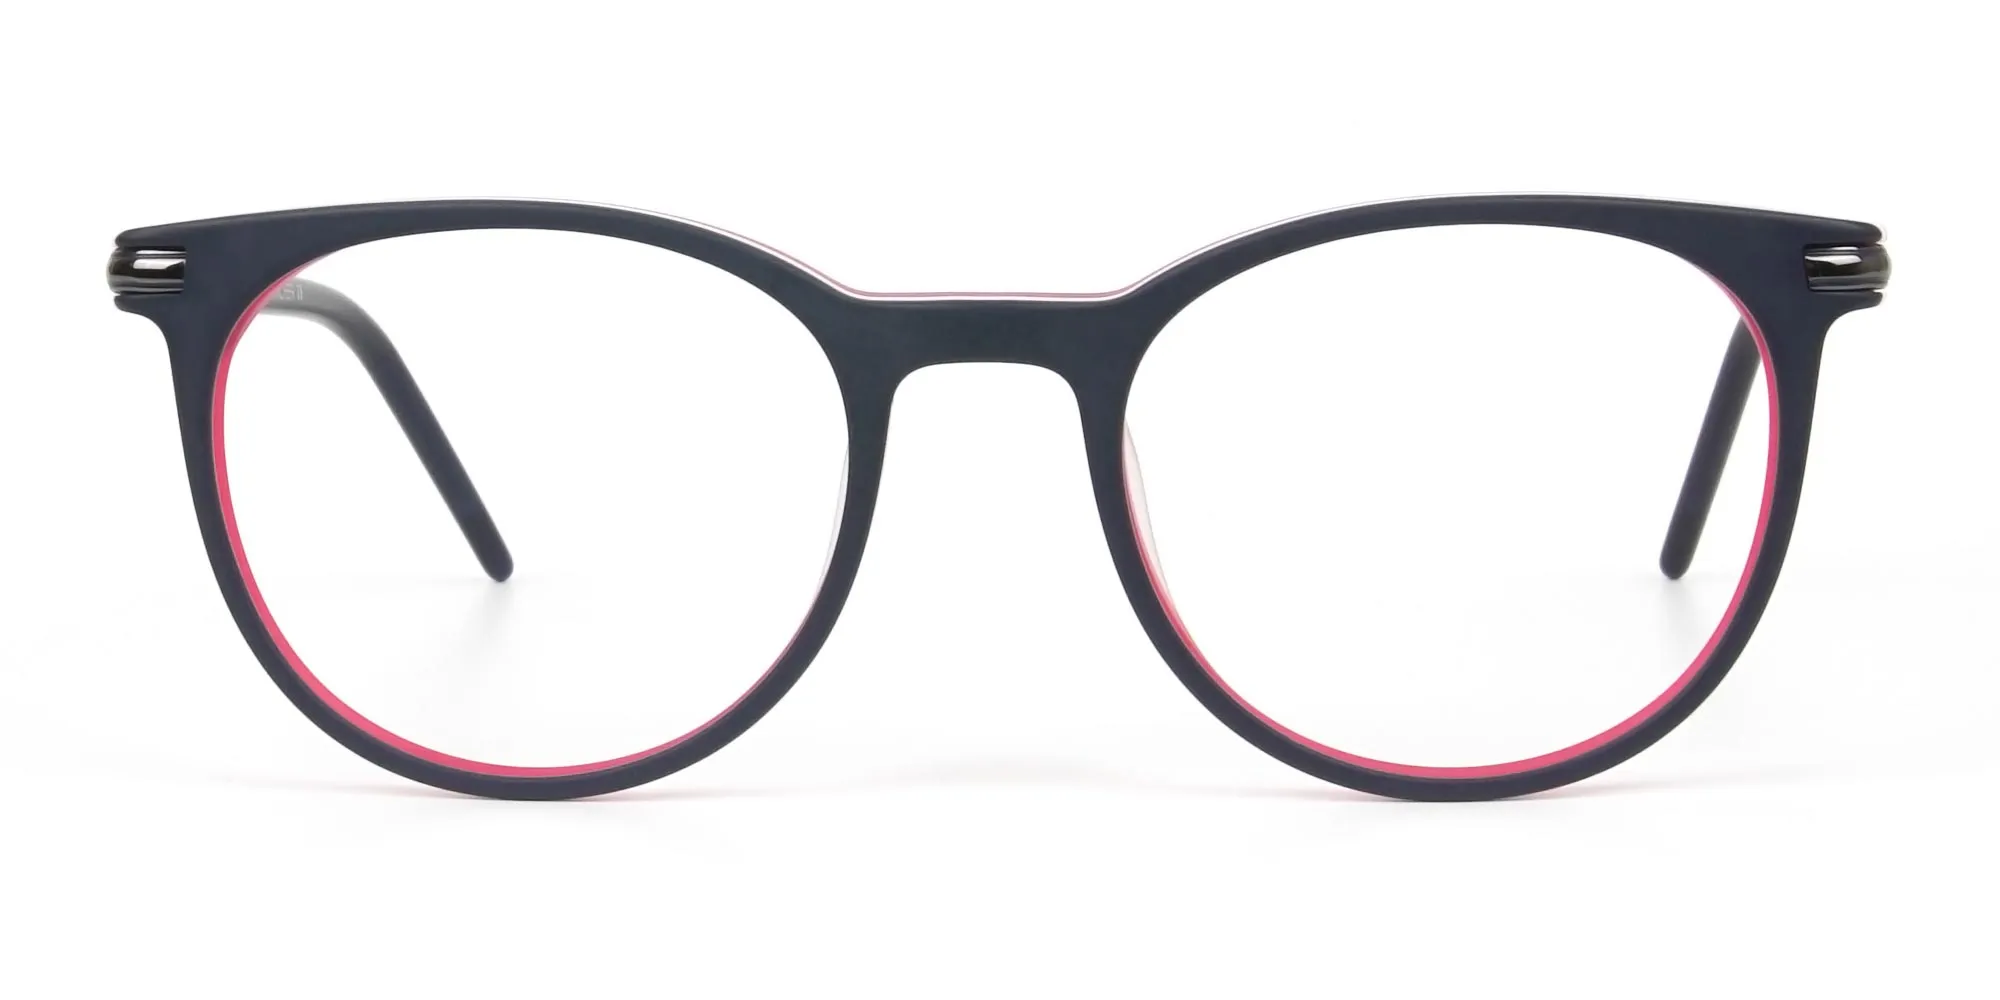 Navy Blue & Red Round Spectacles in Acetate - 2